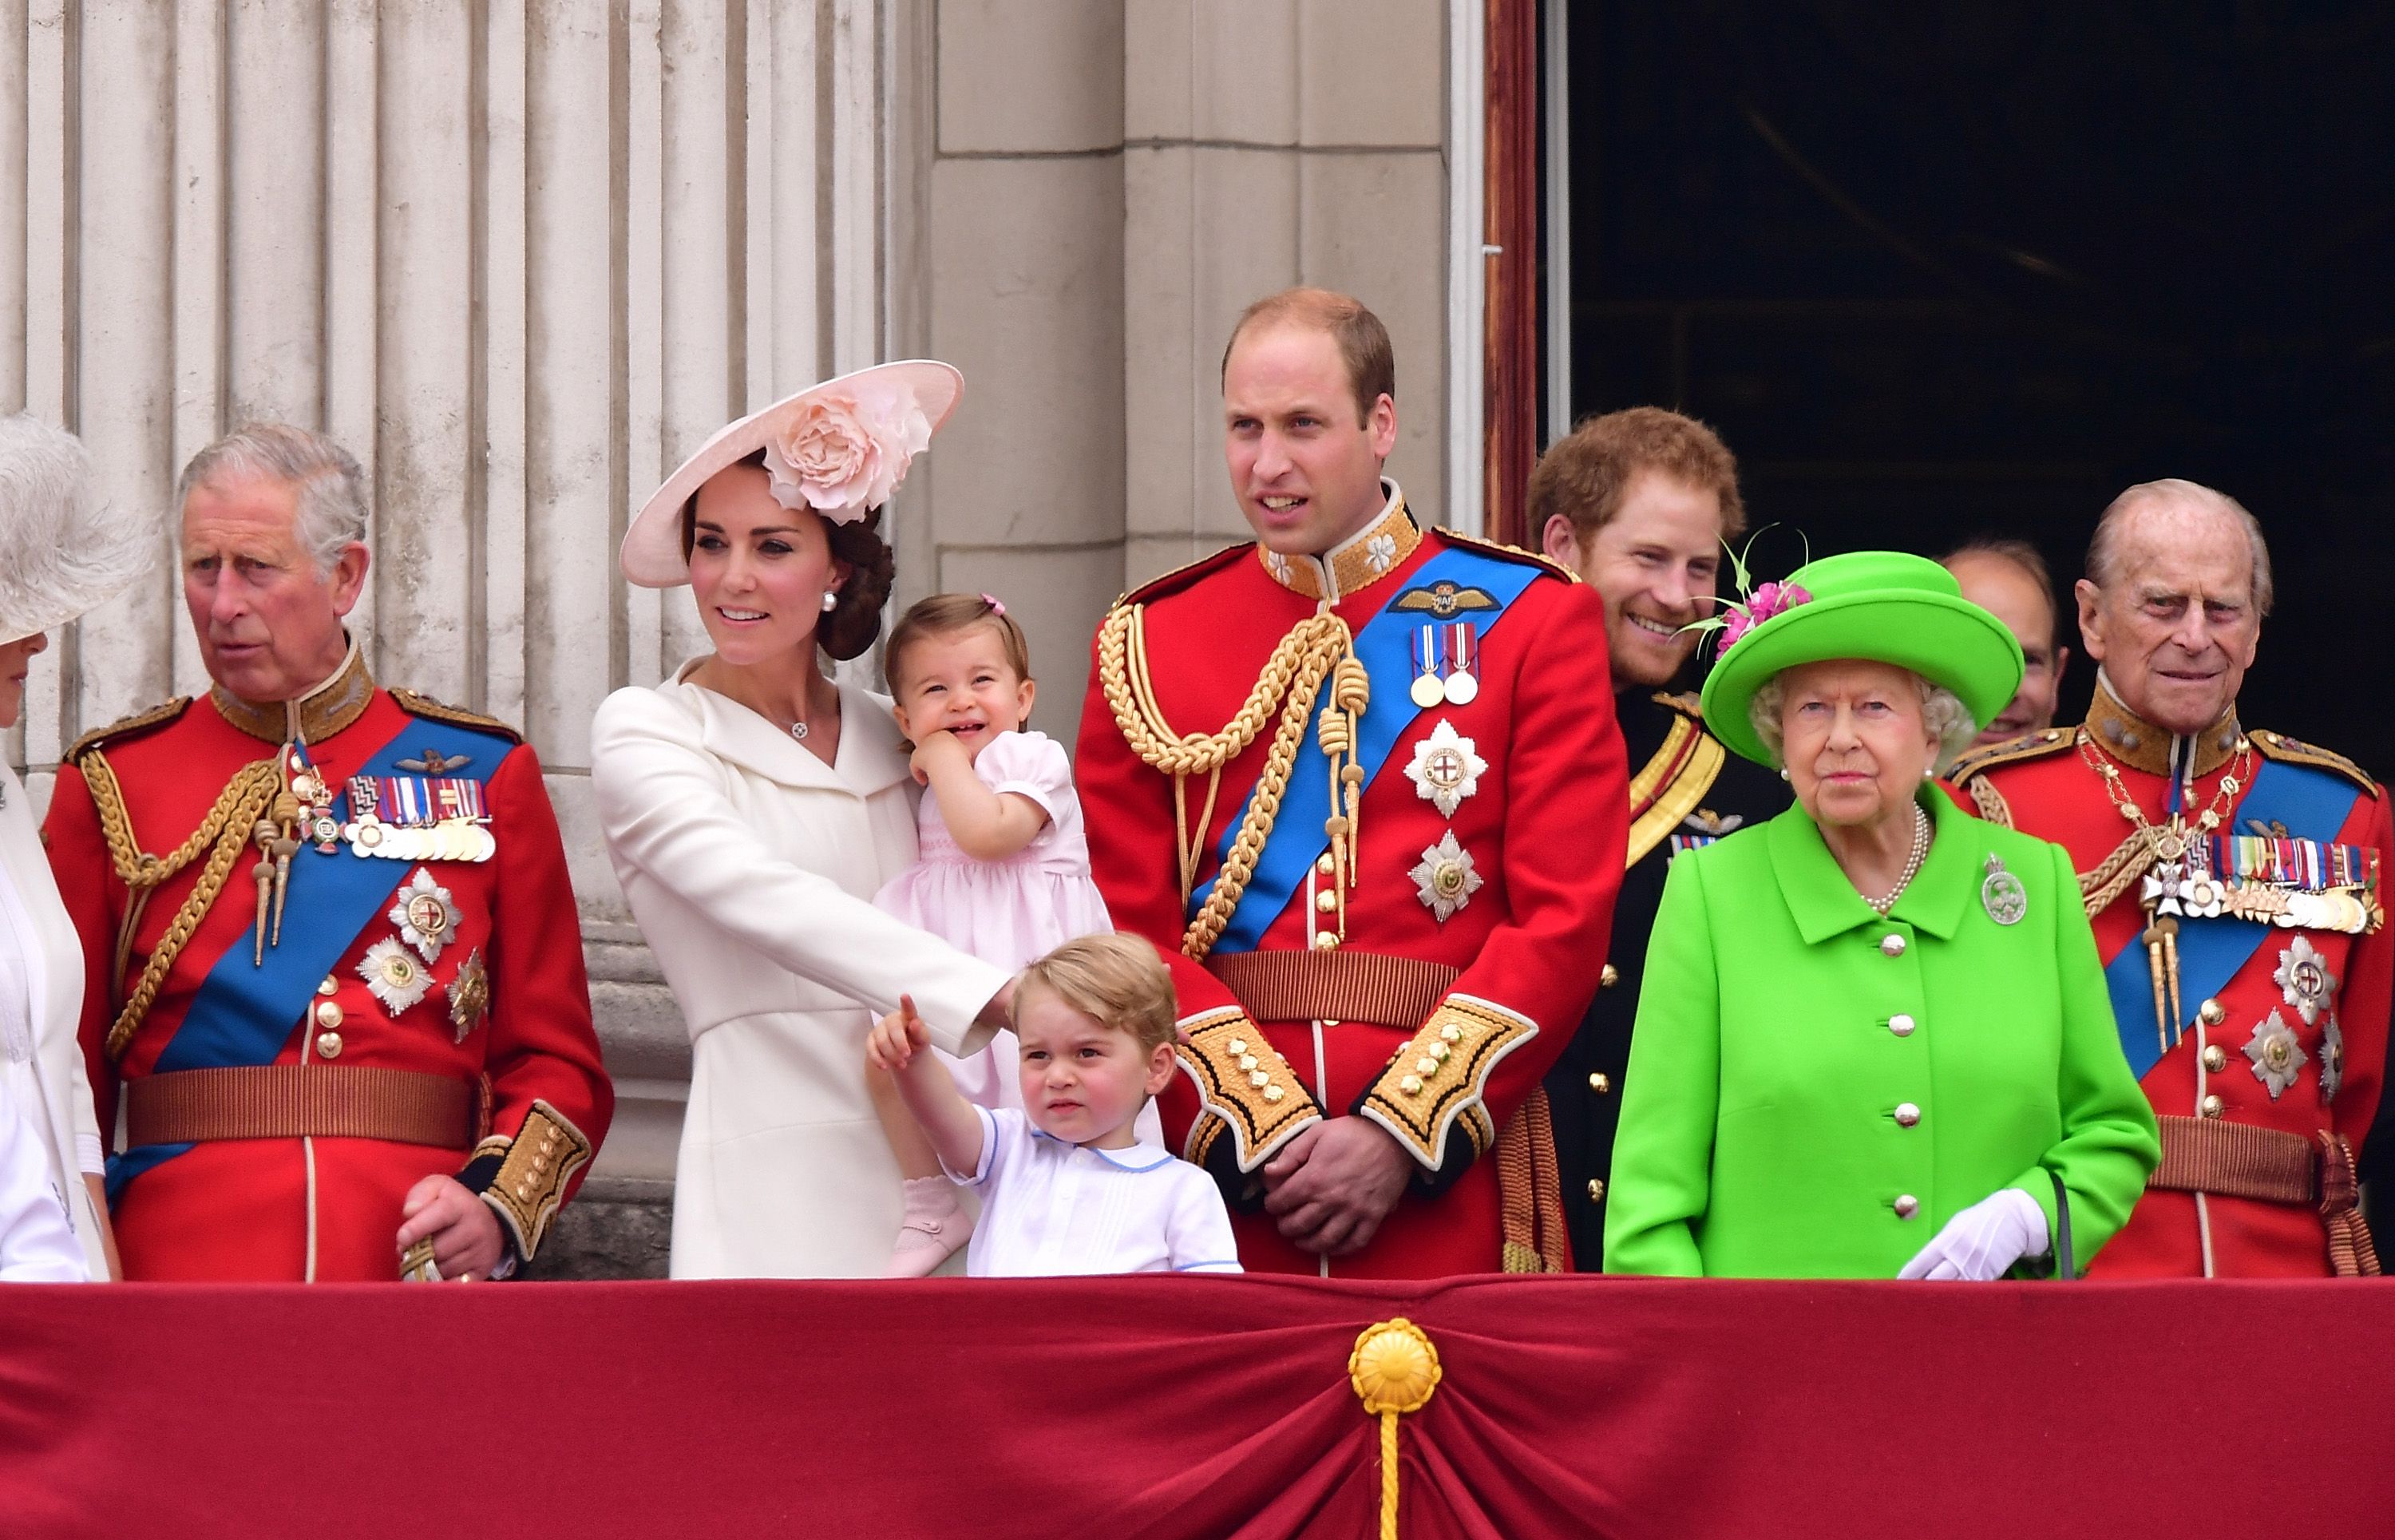 Prince Charles, Catherine, Duchess of Cambridge, Princess Charlotte, Prince George, Prince William, Prince Harry, Queen Elizabeth II and Prince Philip on the balcony during the Trooping the Colour marking the Queen's 90th birthday at The Mall on June 11, 2016. | Getty Images